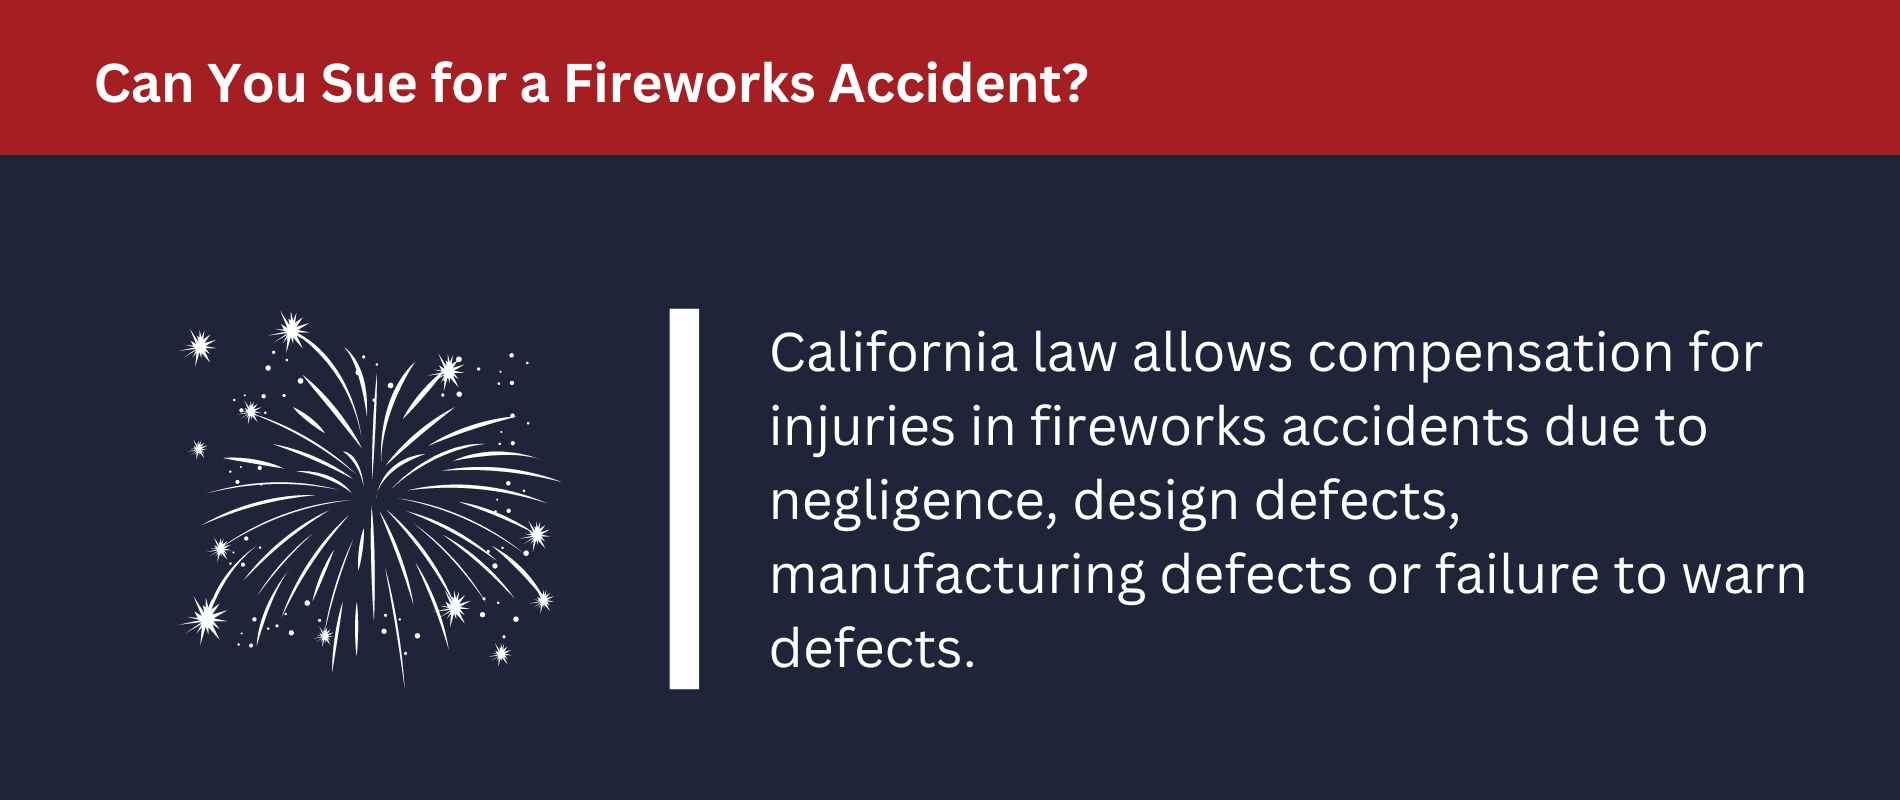 Can You Sue for a Fireworks Accident: California law allows compensation for injuries in fireworks accidents due to negligence.